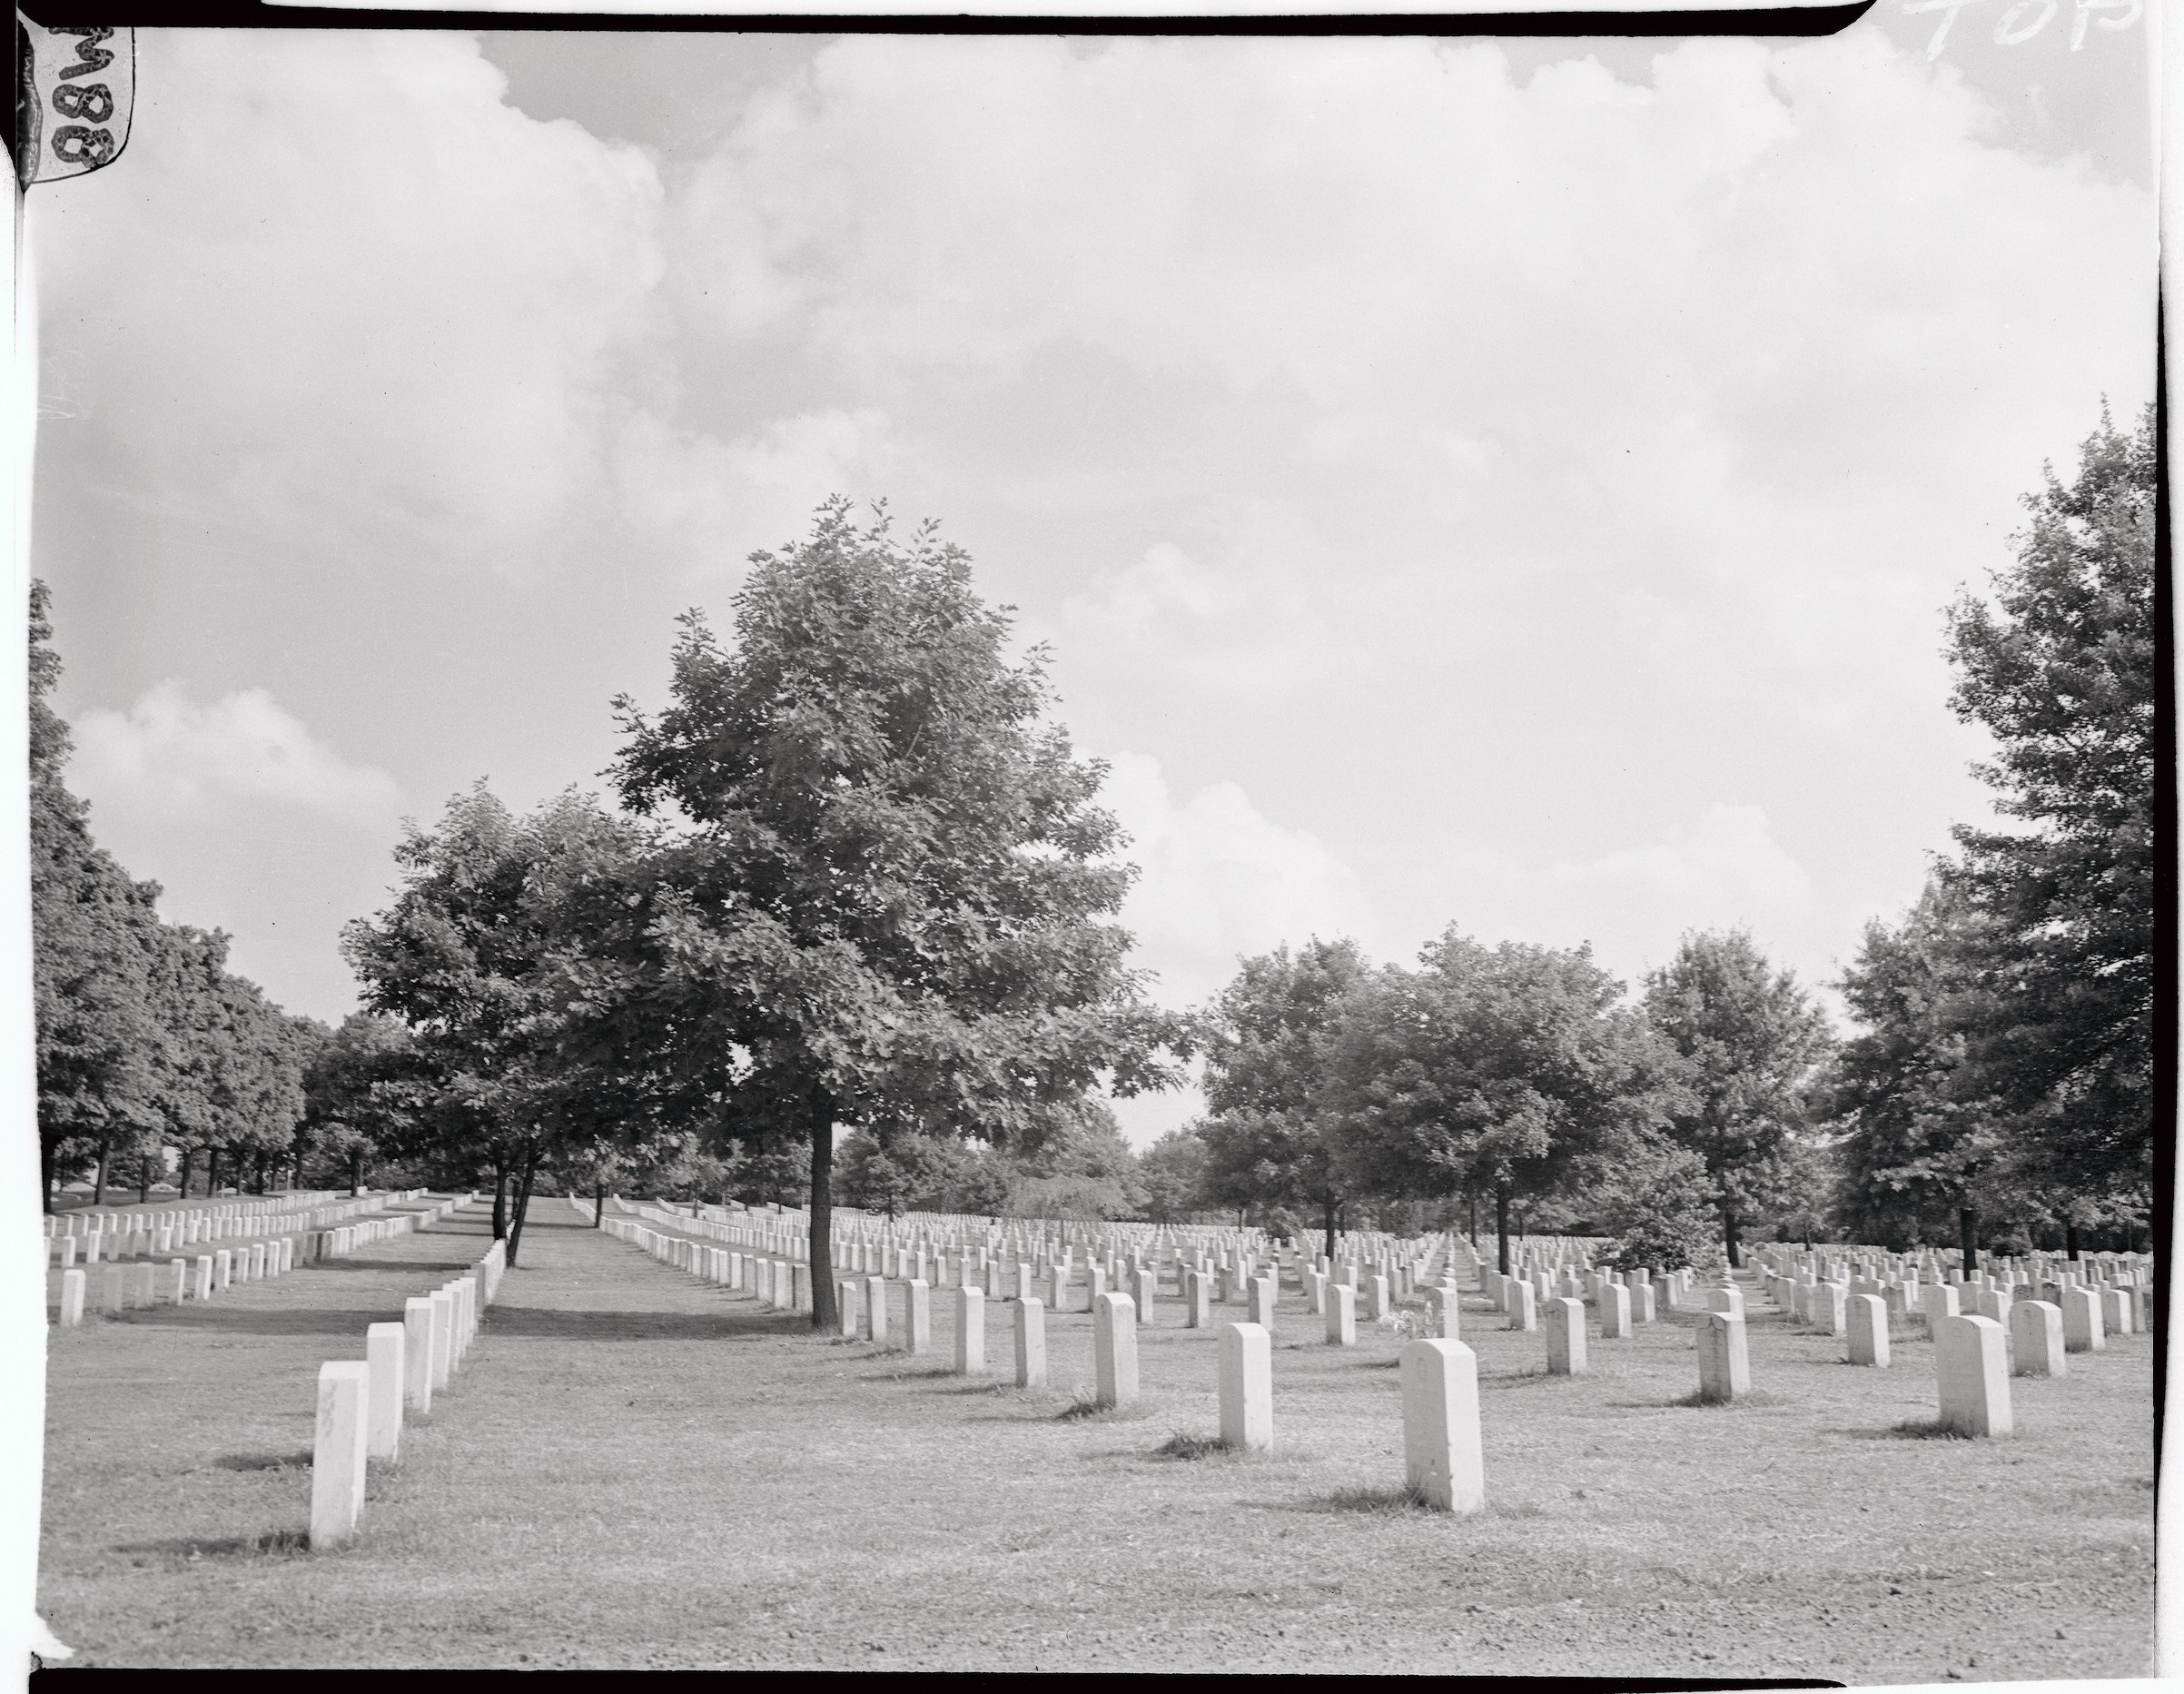 View of Arlington Cemetery in 1946 (Bettmann/Getty Images)